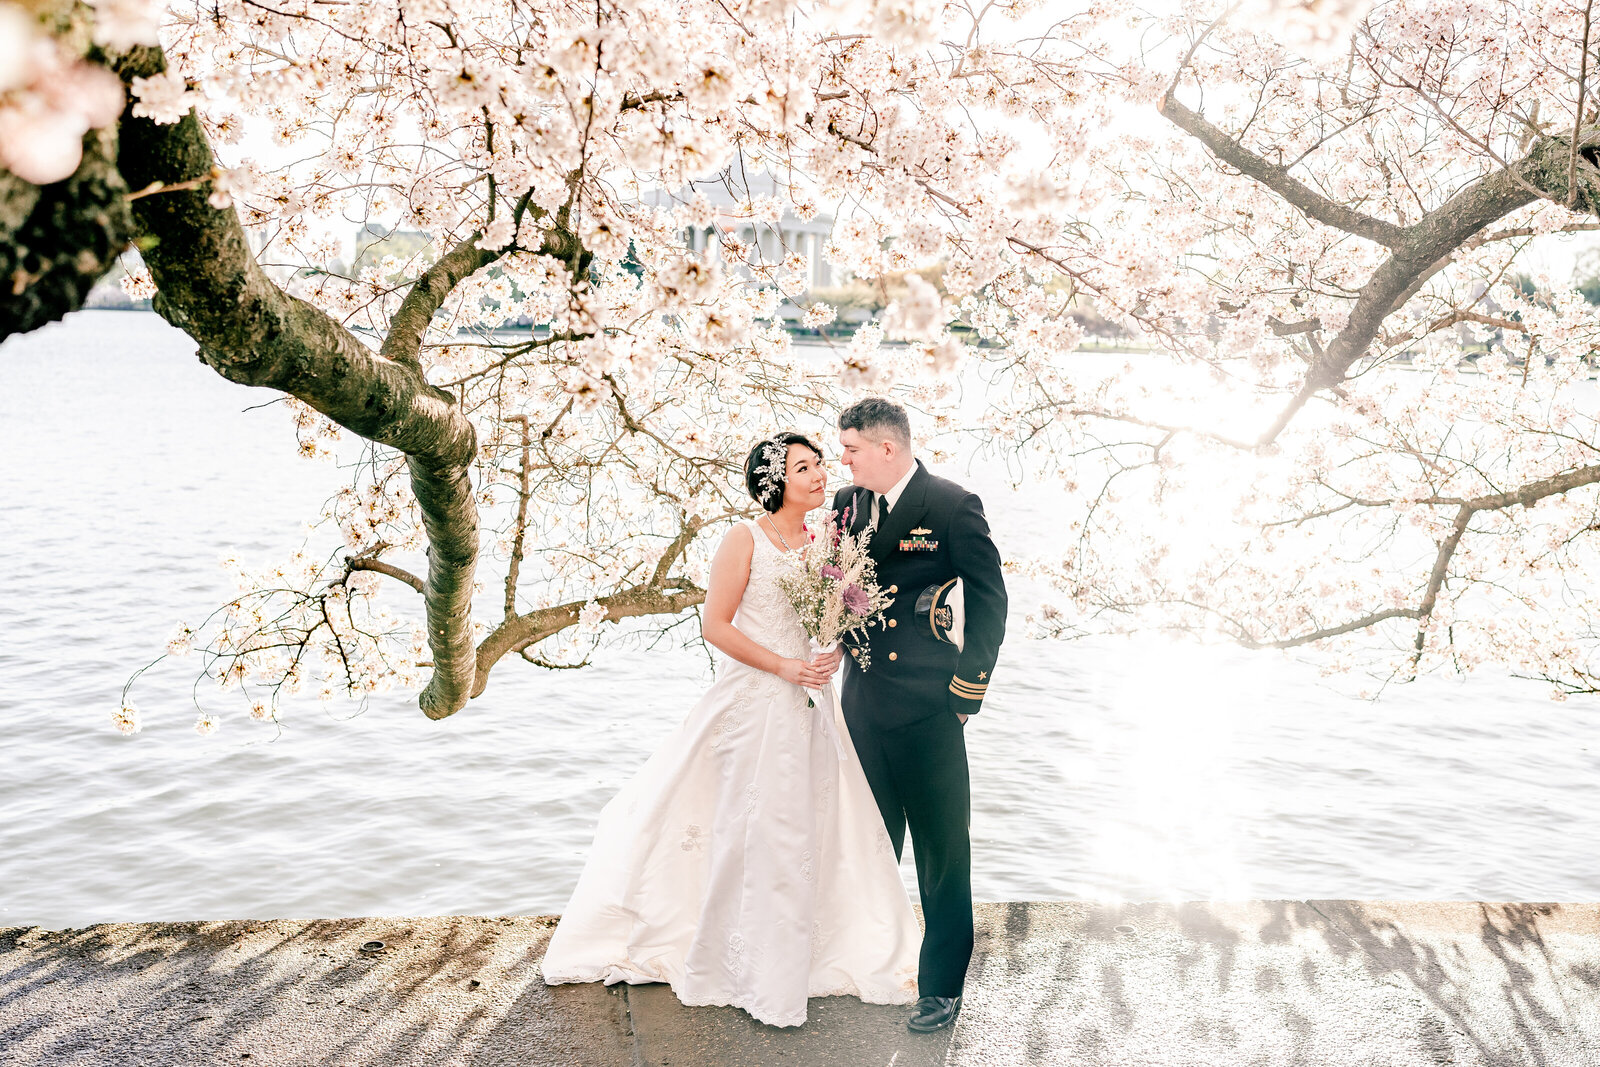 A bride and groom smile at each other under the blossoming trees during the Cherry Blossom Festival in Washington DC